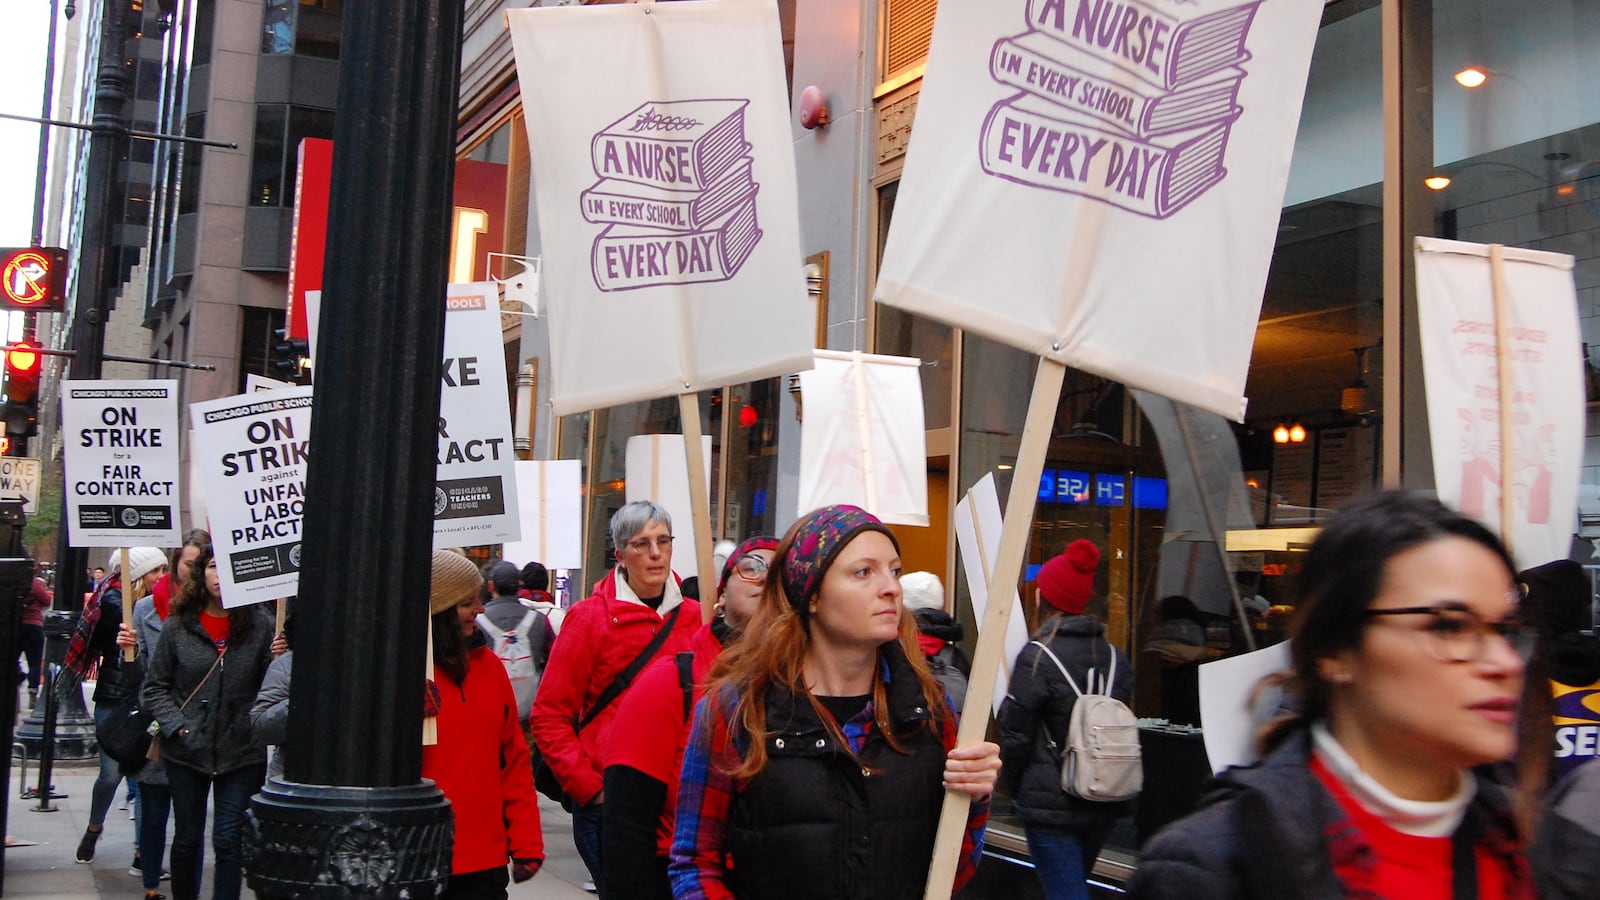 School nurses and their supporters picketed in downtown Chicago on the first day of the teachers strike, Oct. 17, 2019.